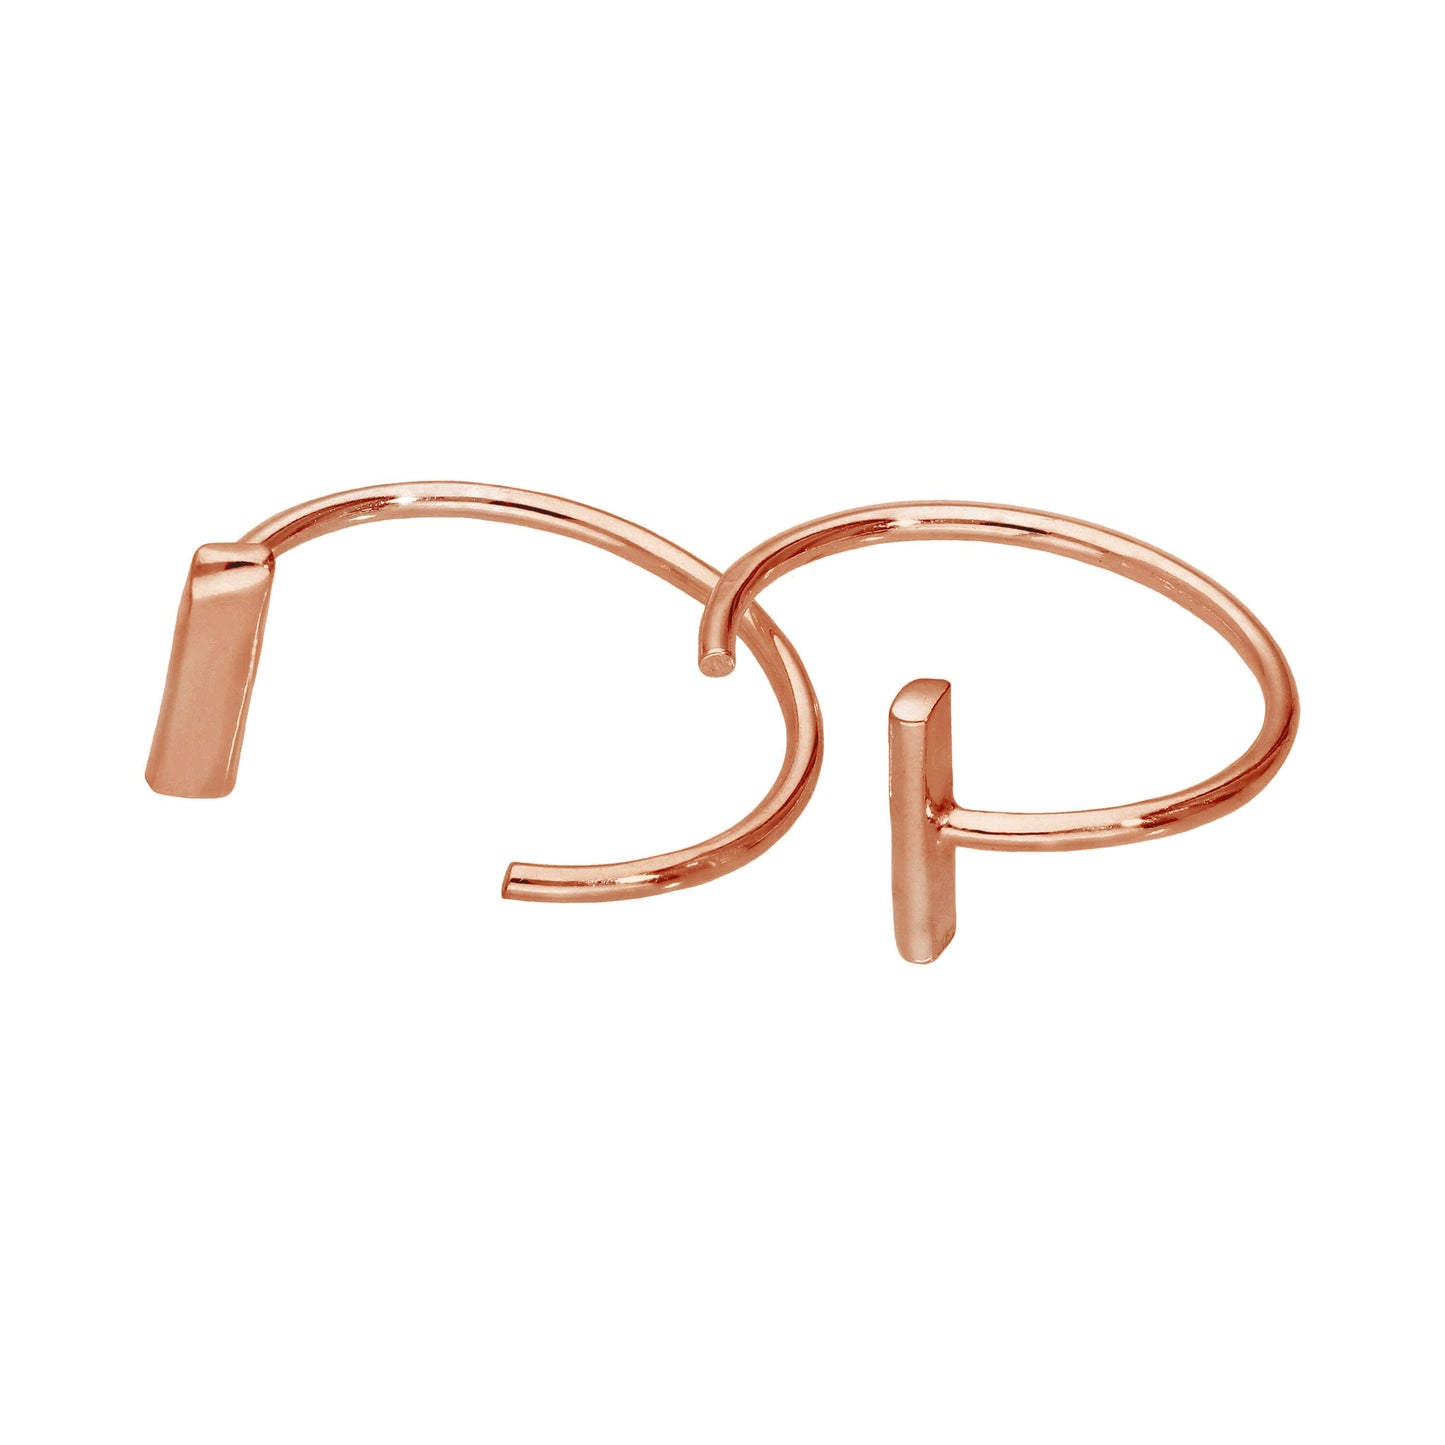 Rose Gold Plated Sterling Silver Hoop Bar Pull Through Earrings